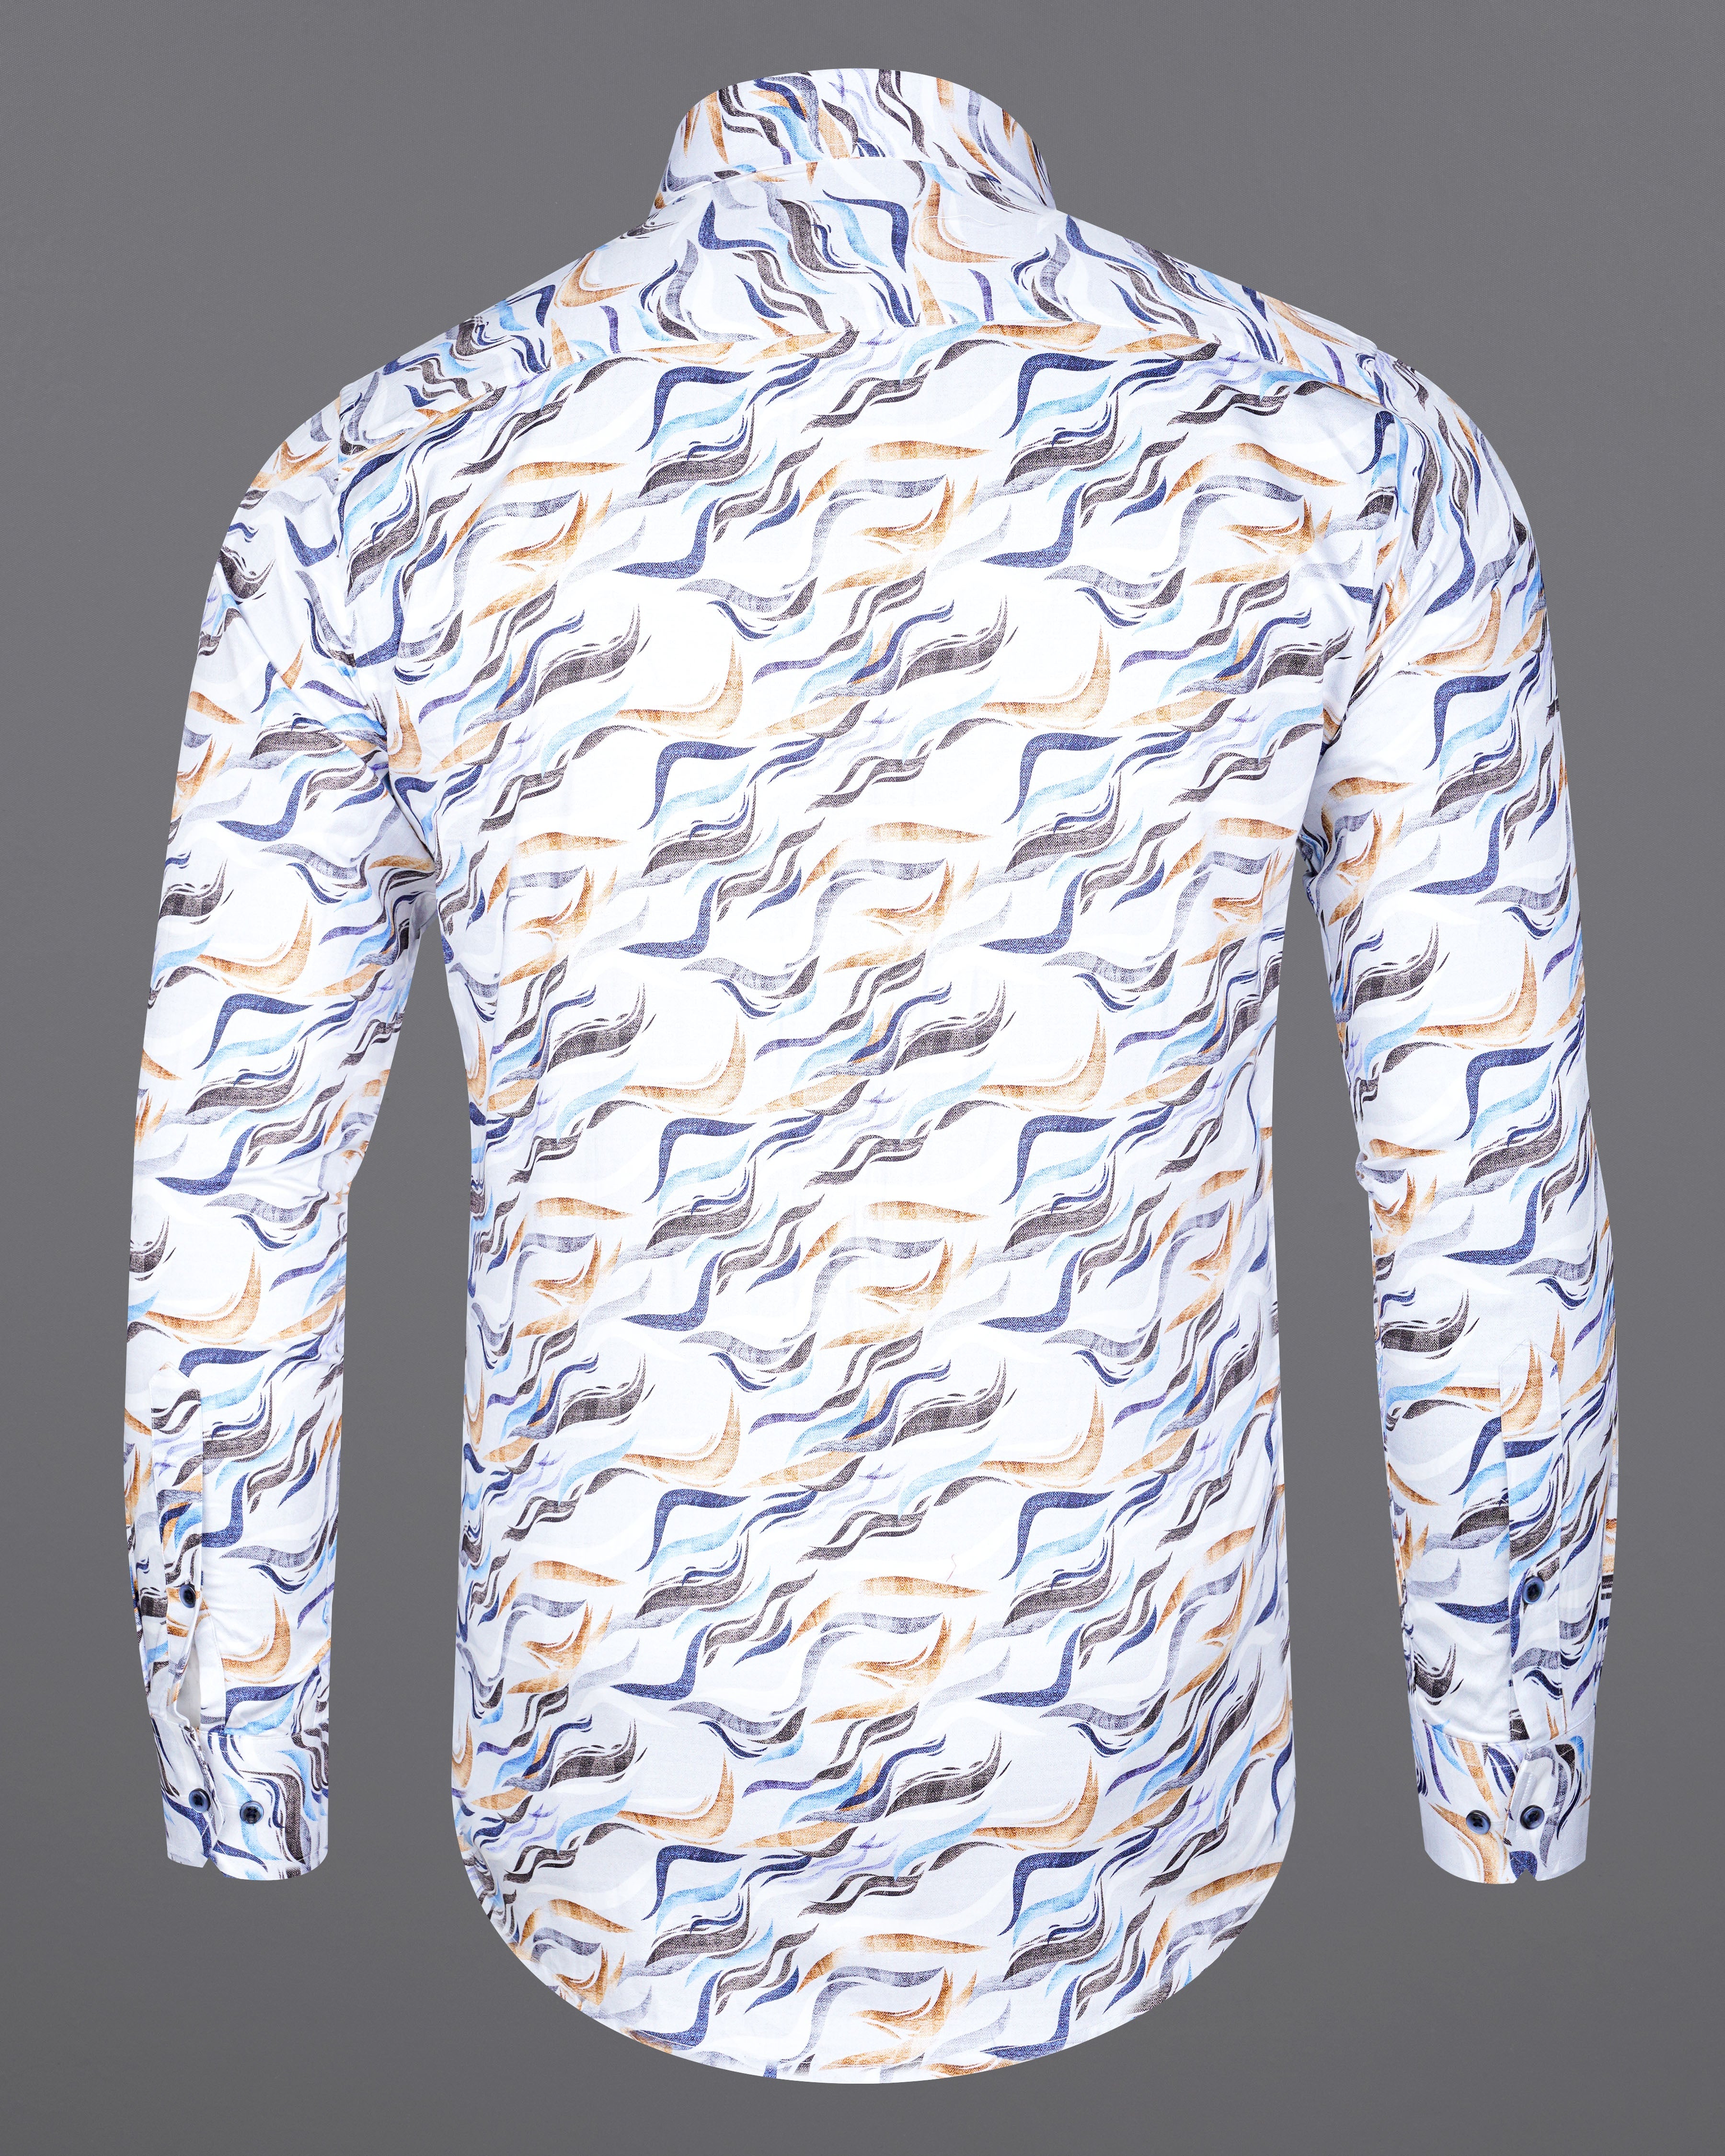 Bright White with Driftwood Brown and Minsk Blue Printed Super Soft Premium Cotton Shirt 8241-BLE-38,8241-BLE-H-38,8241-BLE-39,8241-BLE-H-39,8241-BLE-40,8241-BLE-H-40,8241-BLE-42,8241-BLE-H-42,8241-BLE-44,8241-BLE-H-44,8241-BLE-46,8241-BLE-H-46,8241-BLE-48,8241-BLE-H-48,8241-BLE-50,8241-BLE-H-50,8241-BLE-52,8241-BLE-H-52